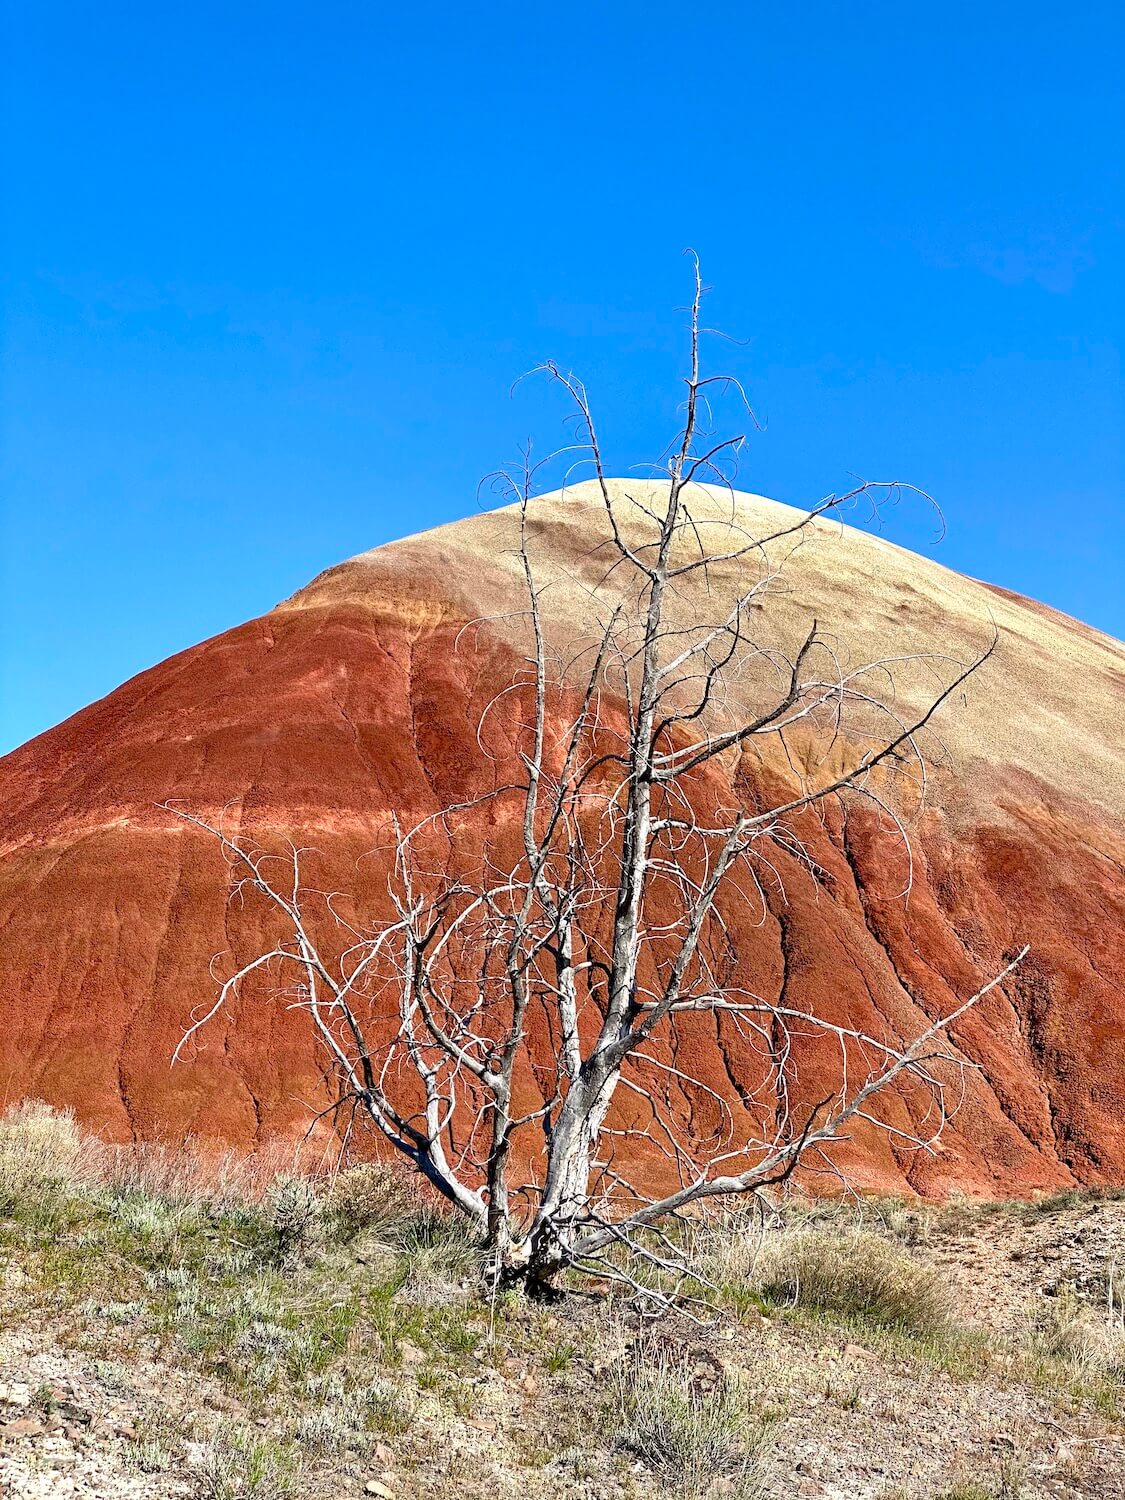 A lifeless tree with whiteish truck and branches is contrasted with a large mound covered in a bright orangish-red color with various textures leading up to a tiny section of orange and finally yellow.  The blue sky above helps make this scene pop.  